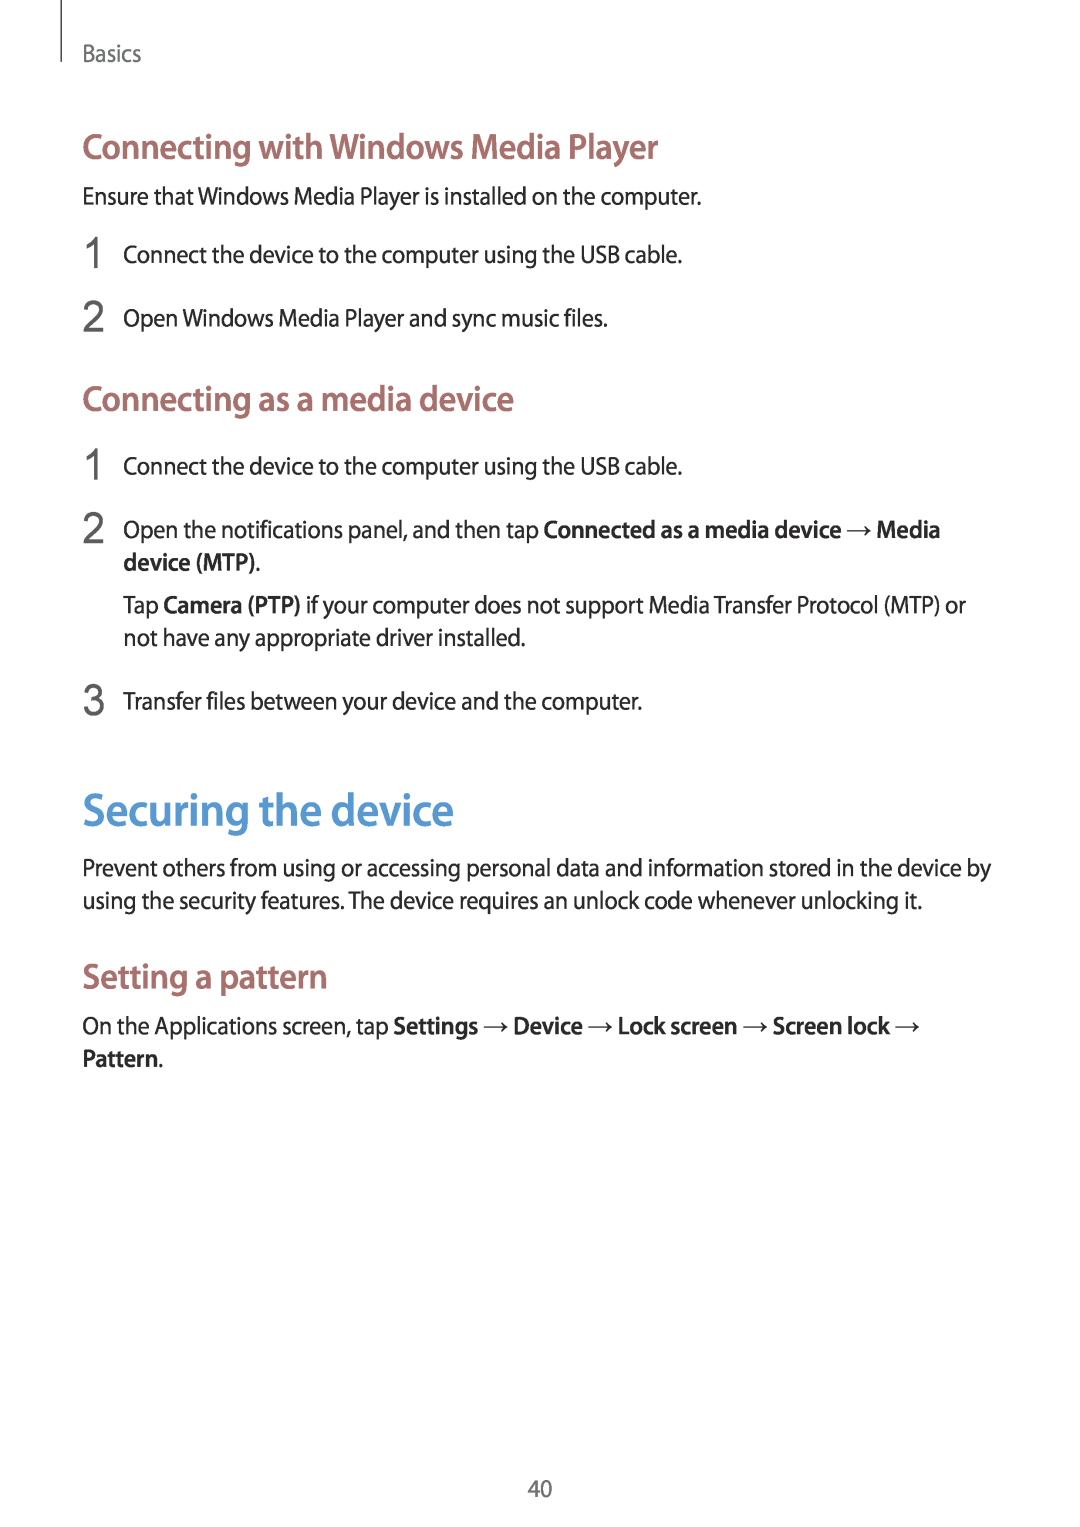 Samsung SM-G7102ZDAEGY Securing the device, Connecting with Windows Media Player, Connecting as a media device, device MTP 